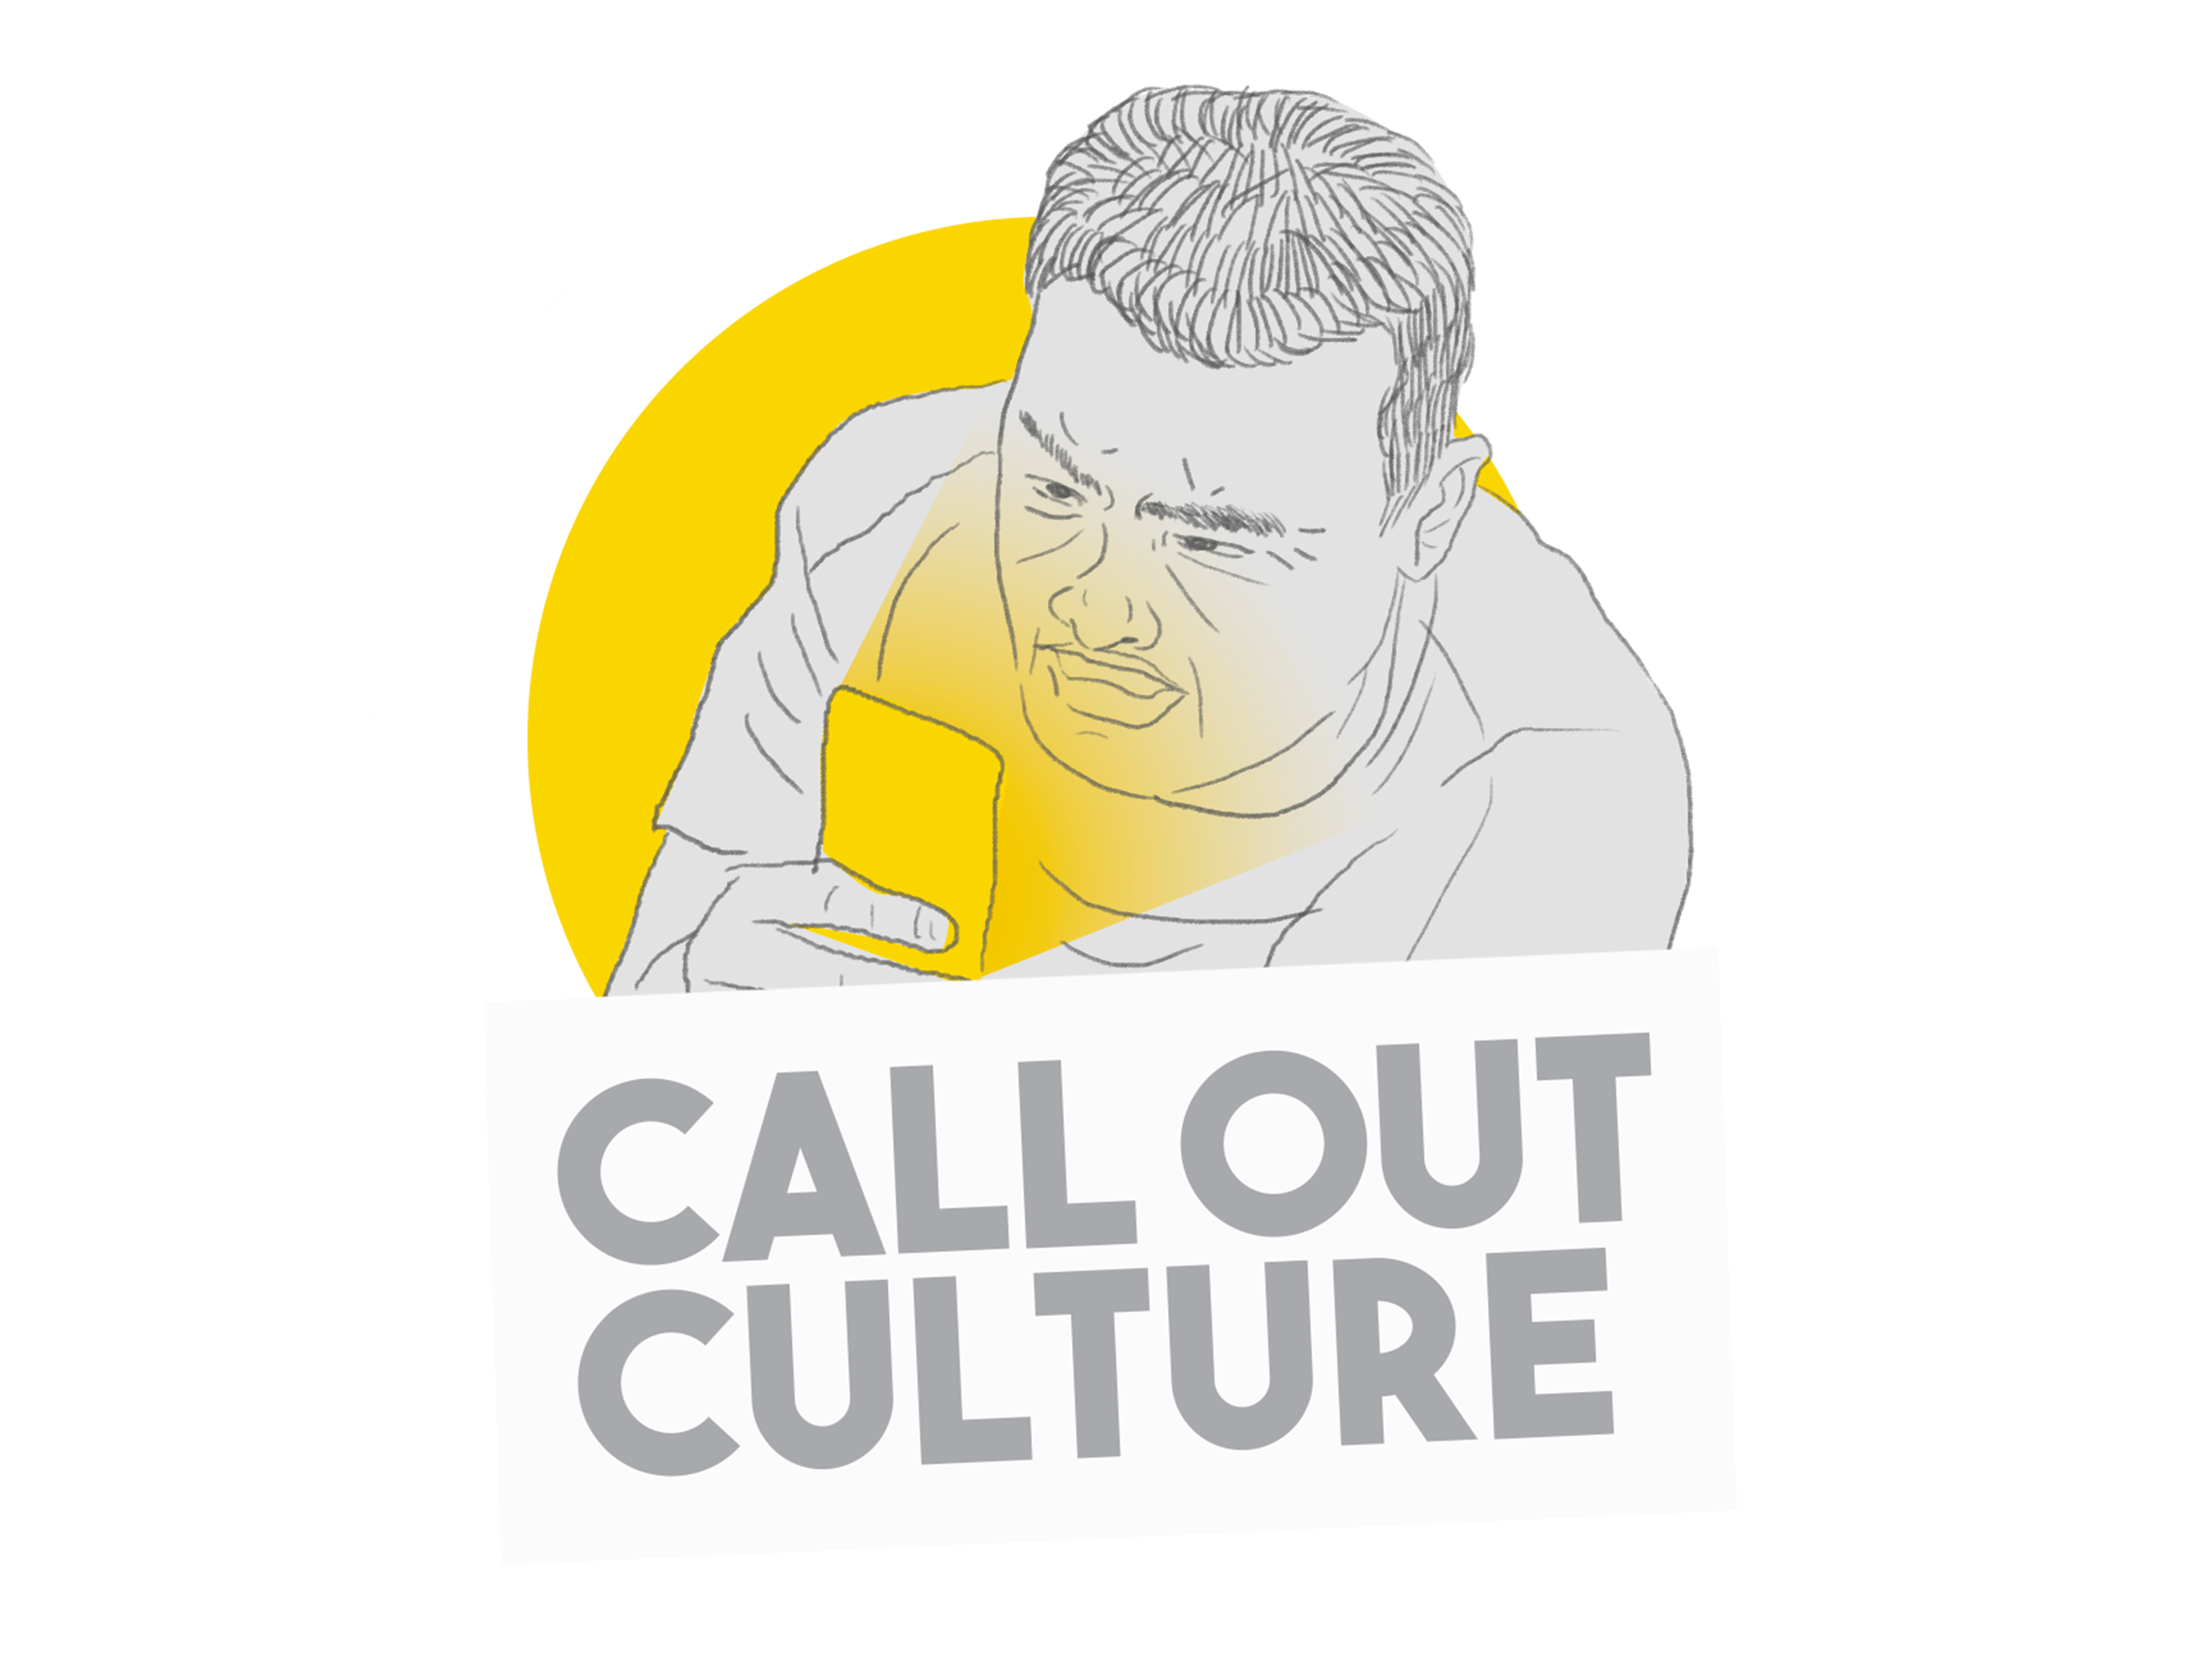 The Callout Culture